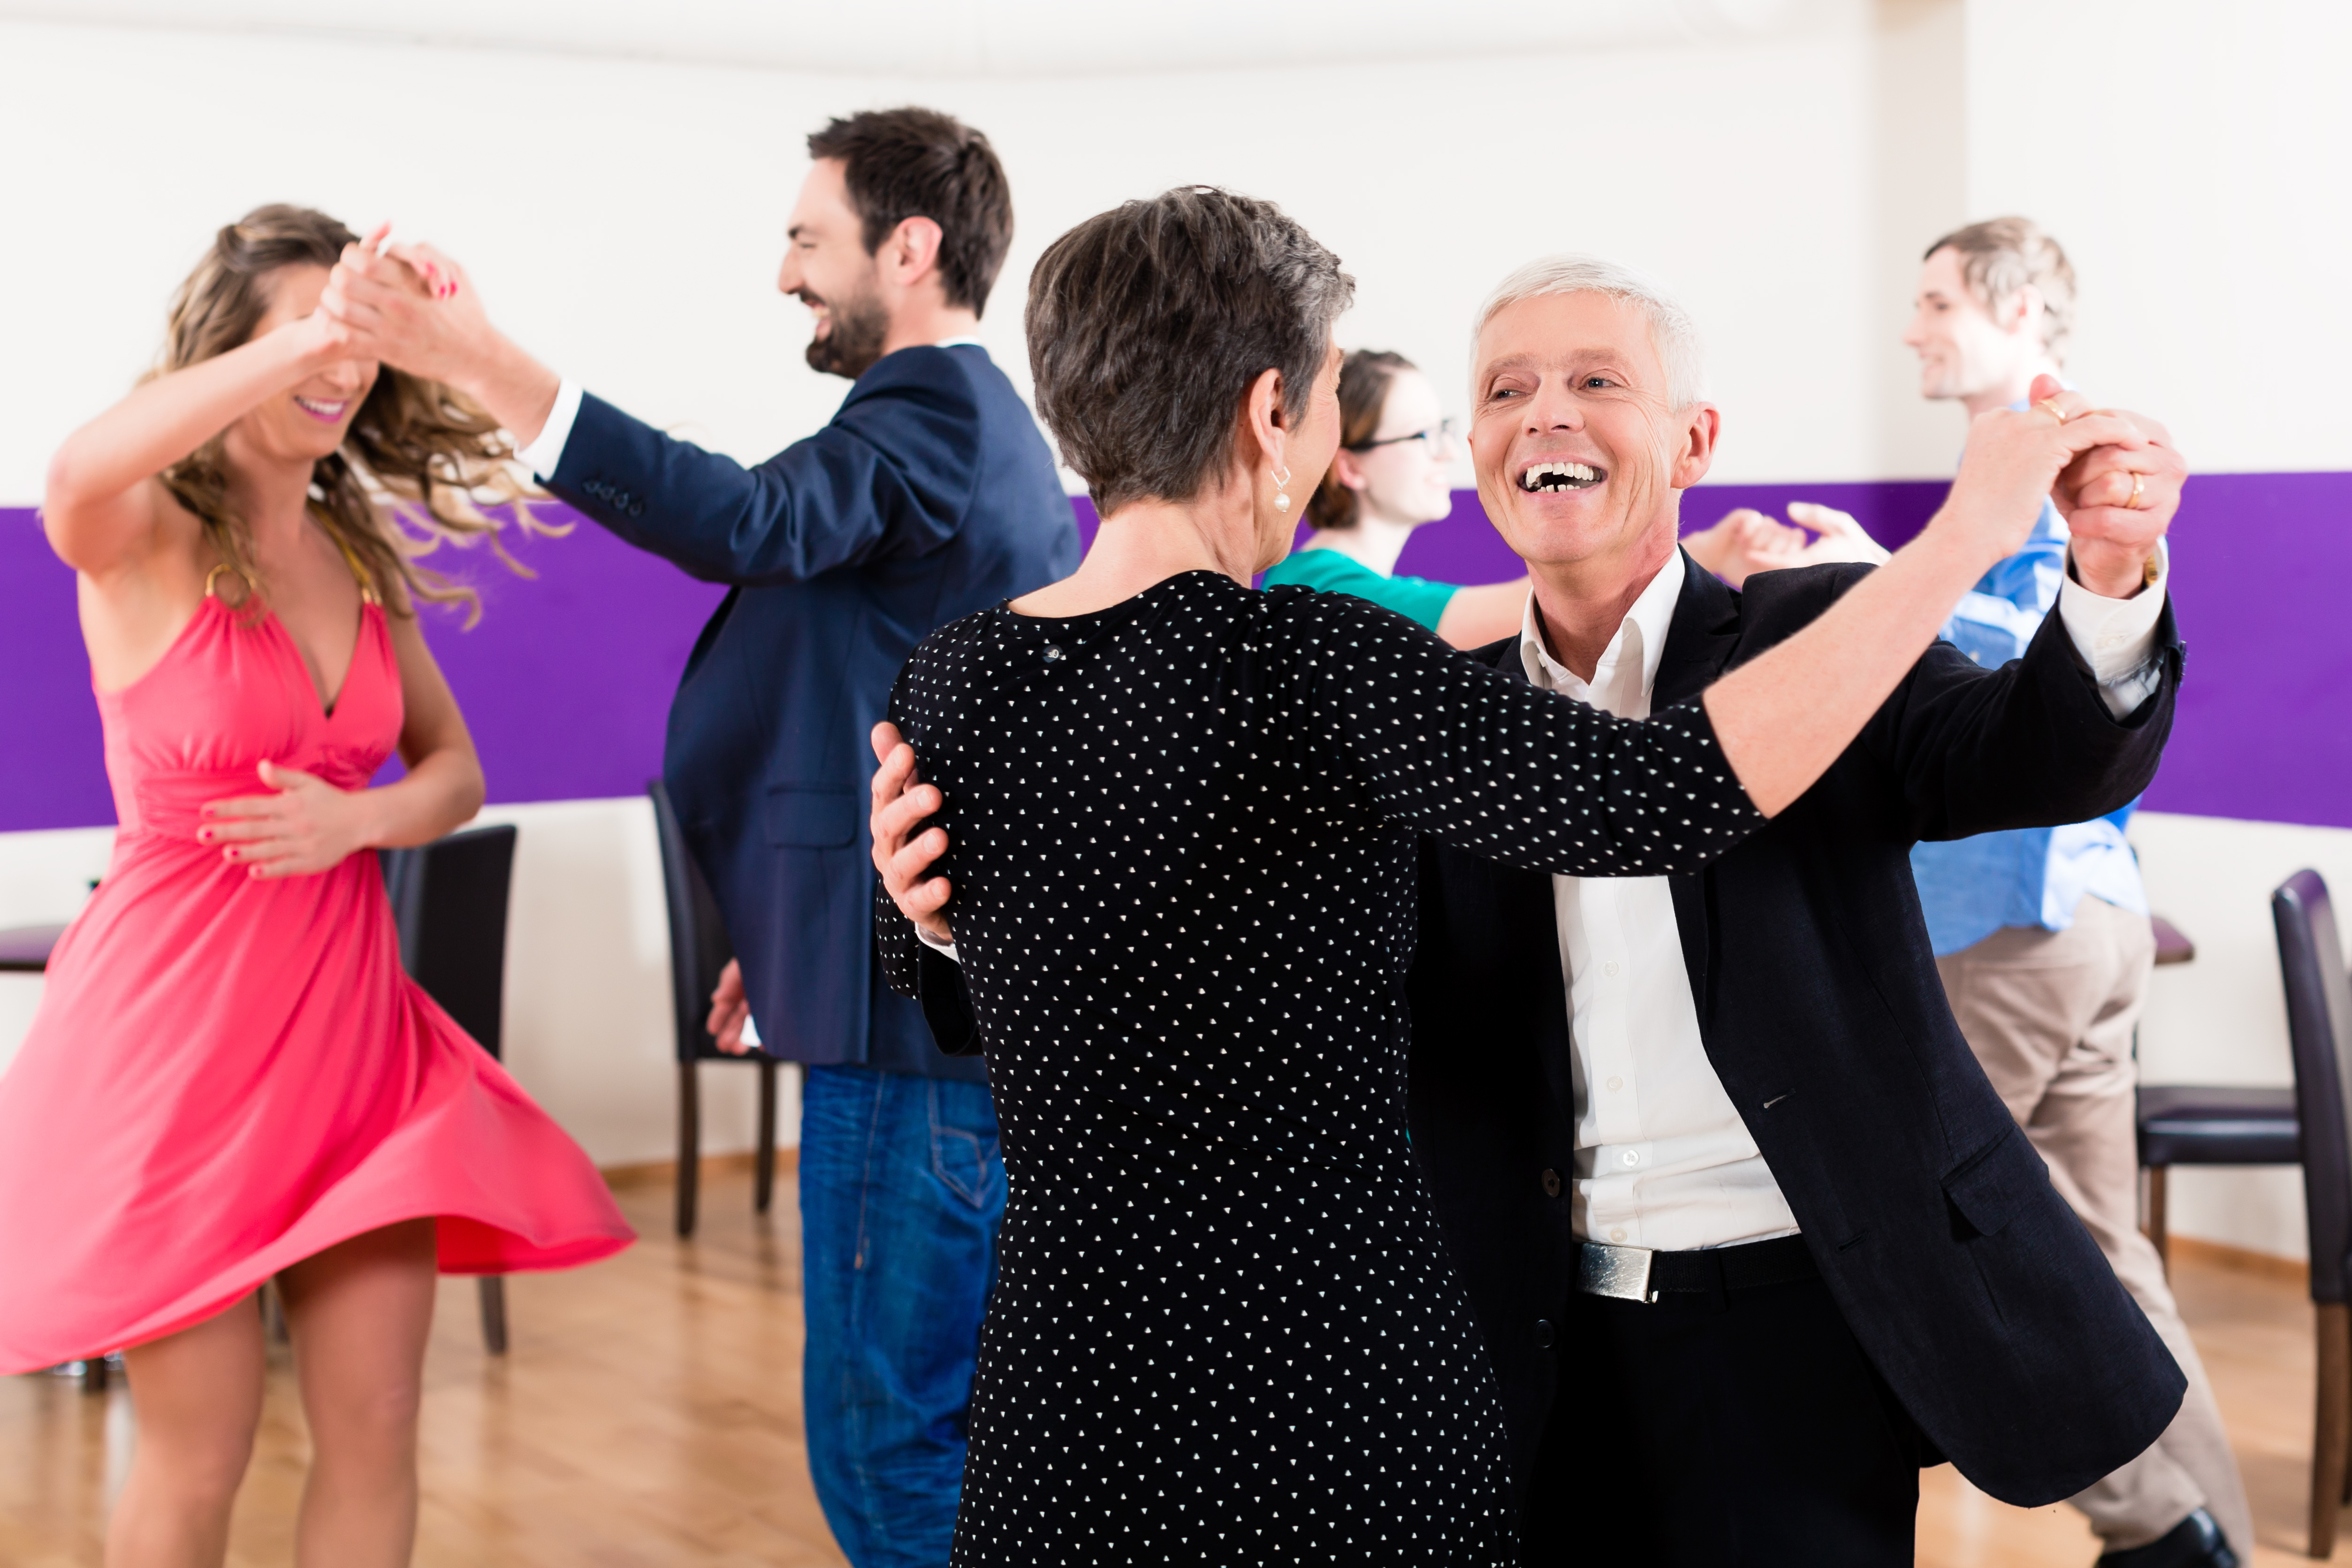 three couples dancing in a large room holding hands up high